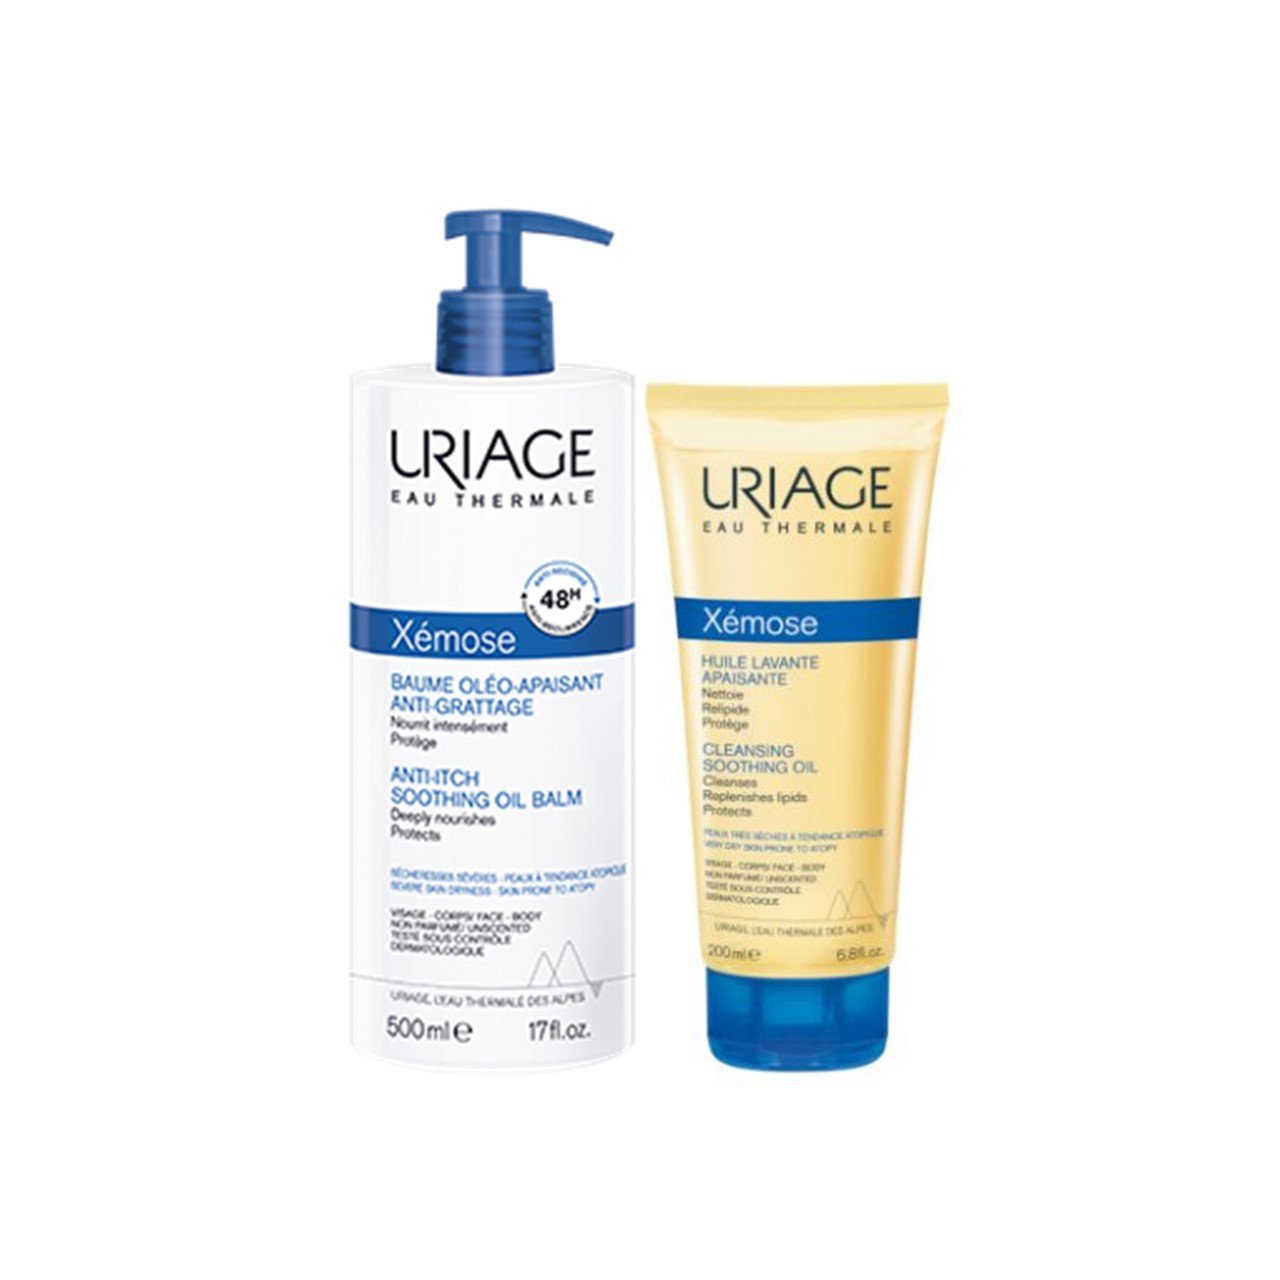 Uriage Xémose Anti-Itch Soothing Oil Balm 500ml + Cleansing Oil 200ml